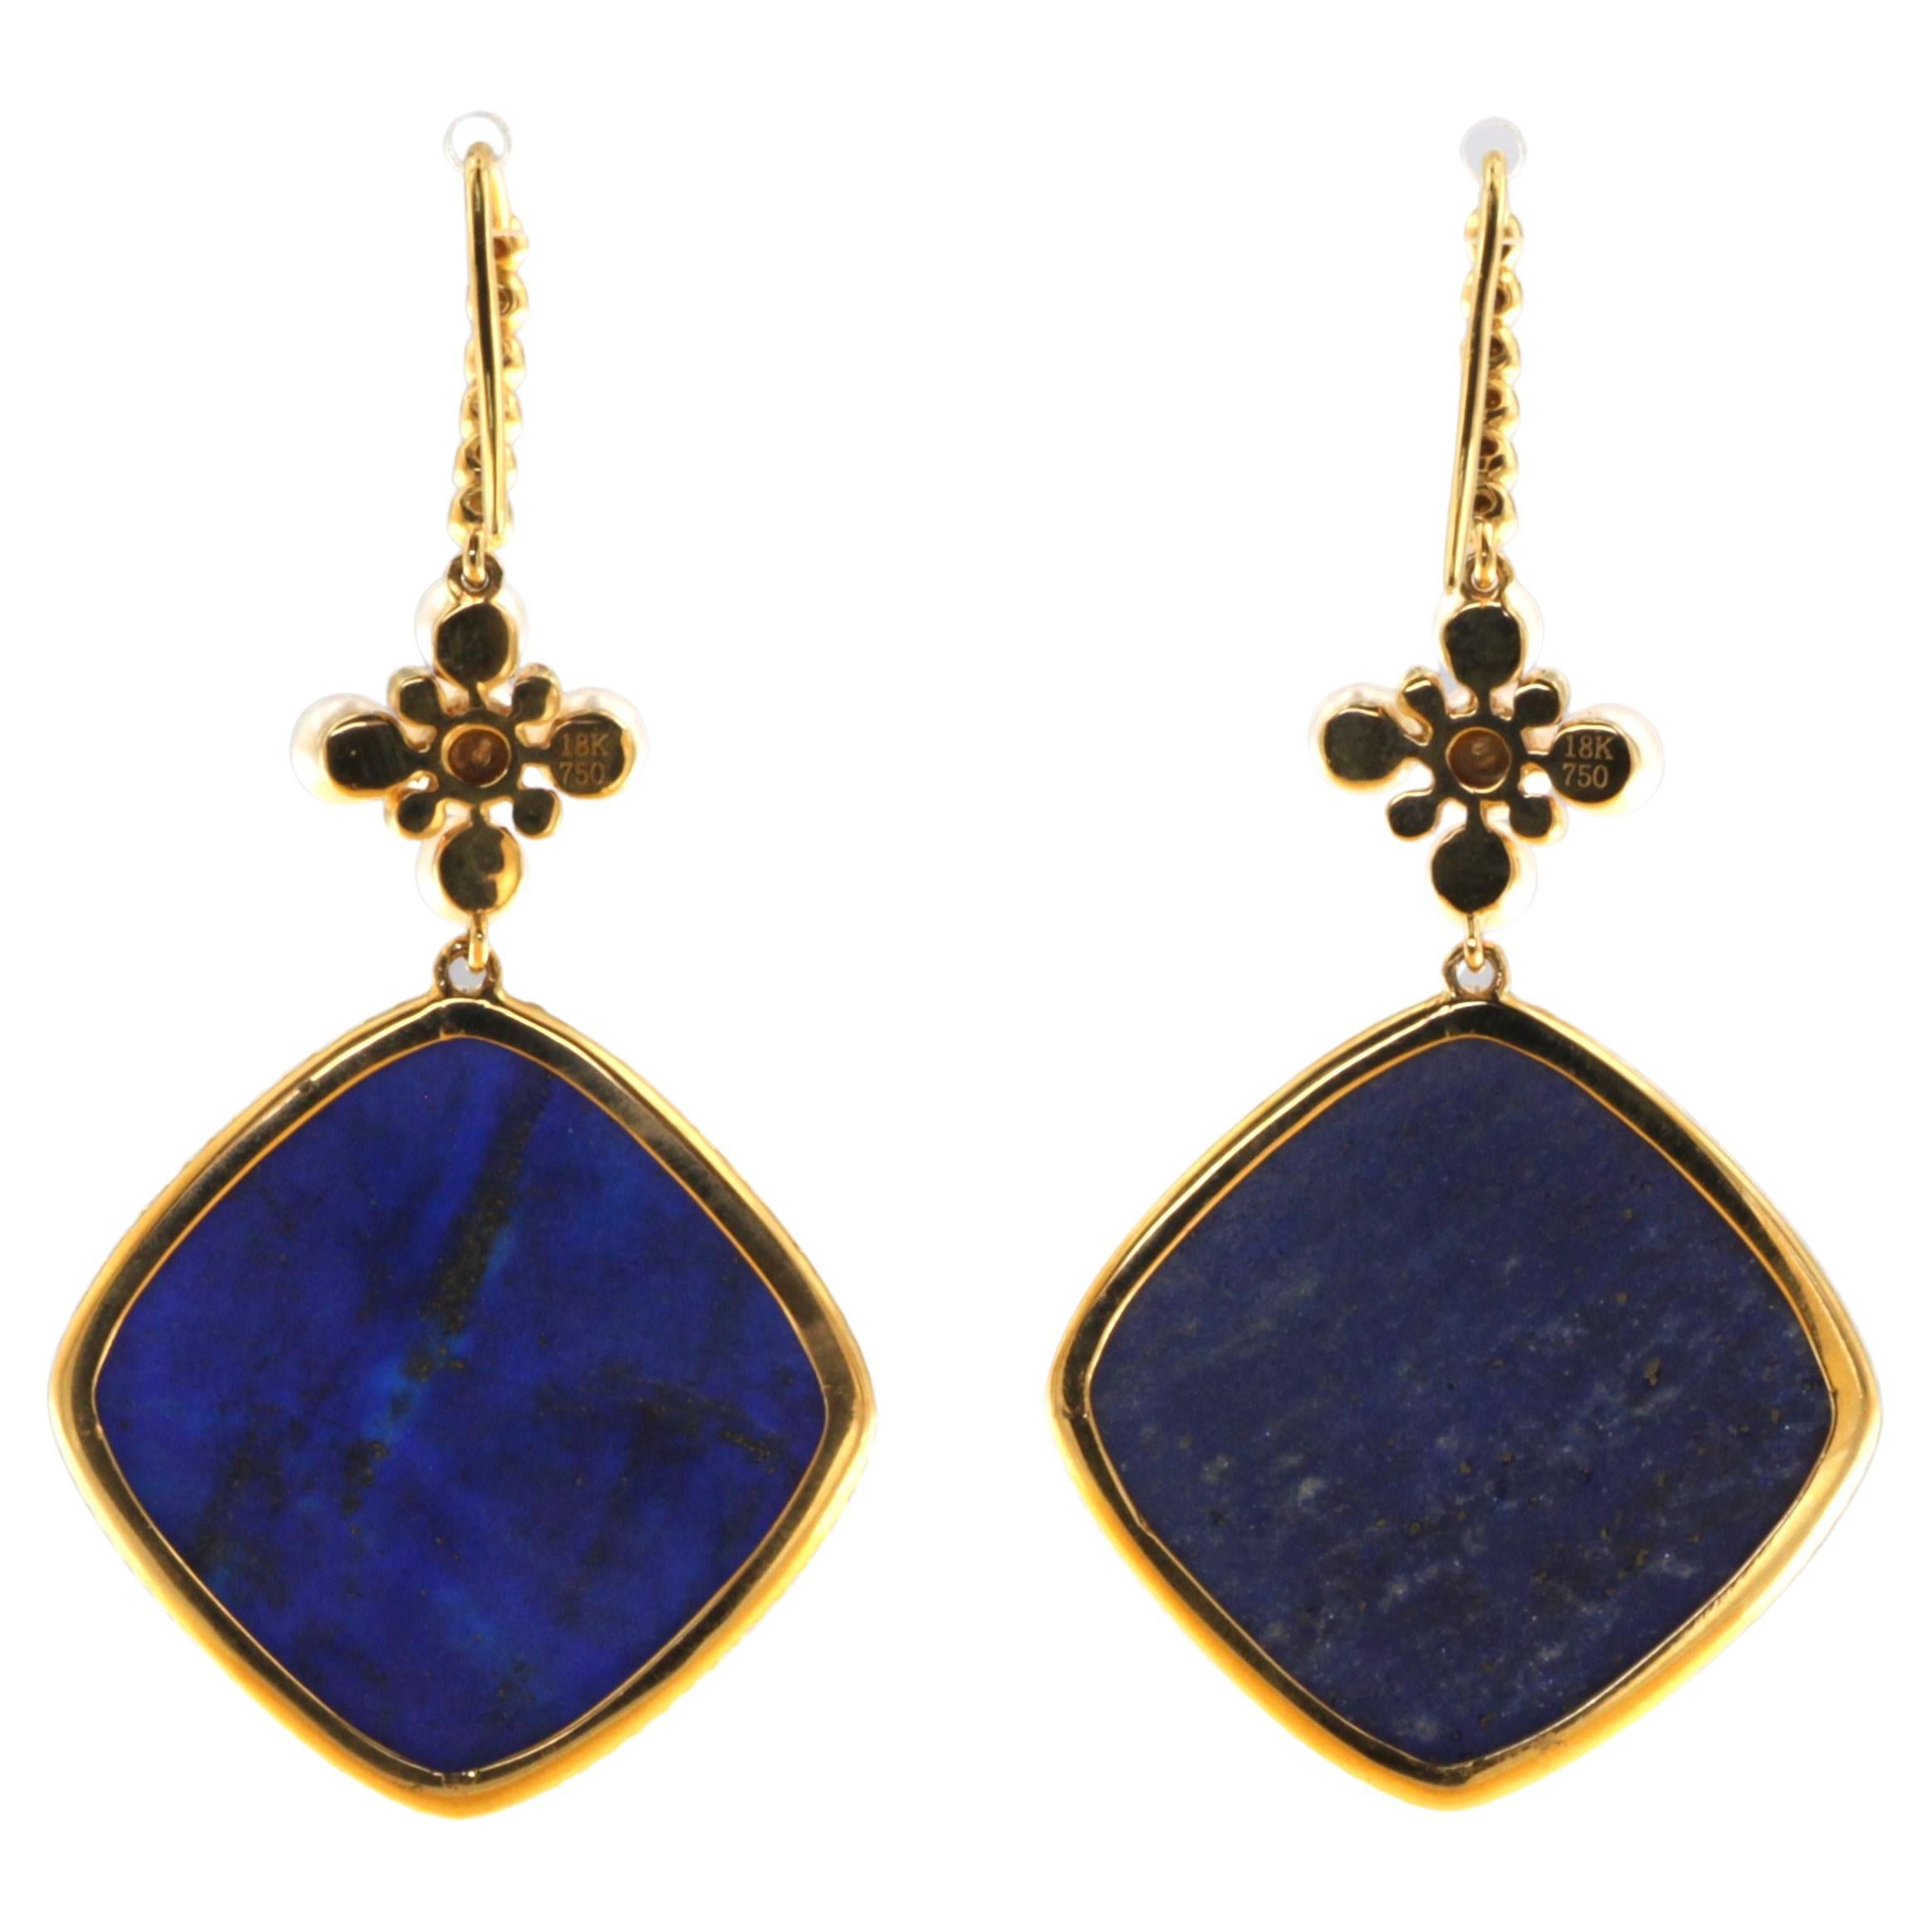 Sliced to display their natural variations in character.
Lapis Lazuli slices are topped with clear faceted rock crystal.
The earrings are set in 18K Yellow Gold.
10 fresh water pearl dimensions range from 3-4.5mm.
There are 22.40ct in Turquoise And